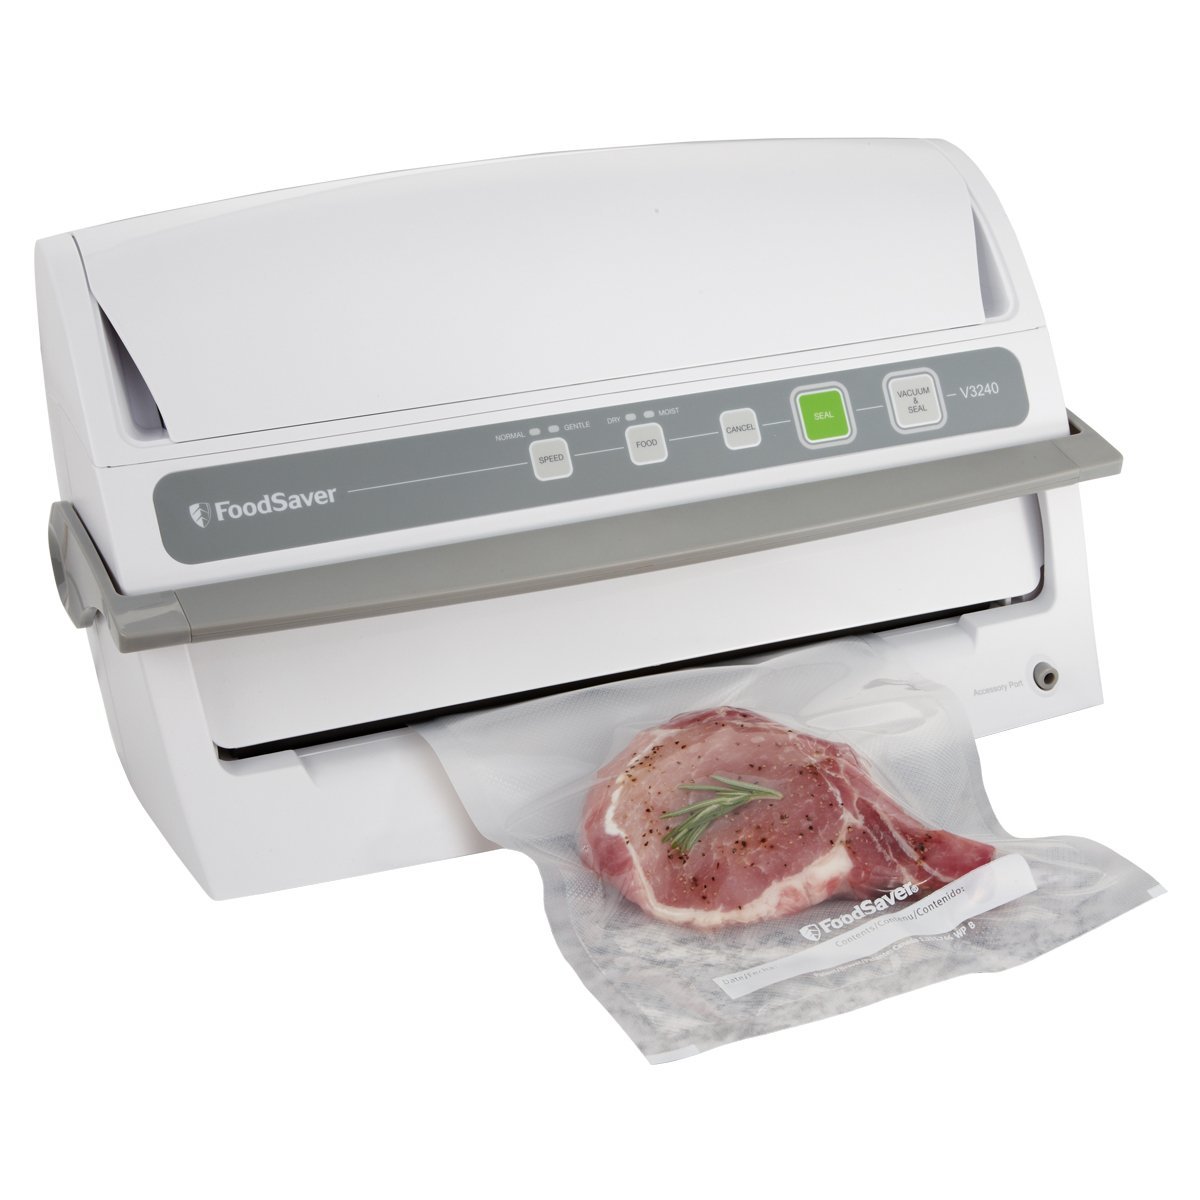 FoodSaver Automatic Vacuum Sealing System with Starter Kit Only $84.99 Shipped!